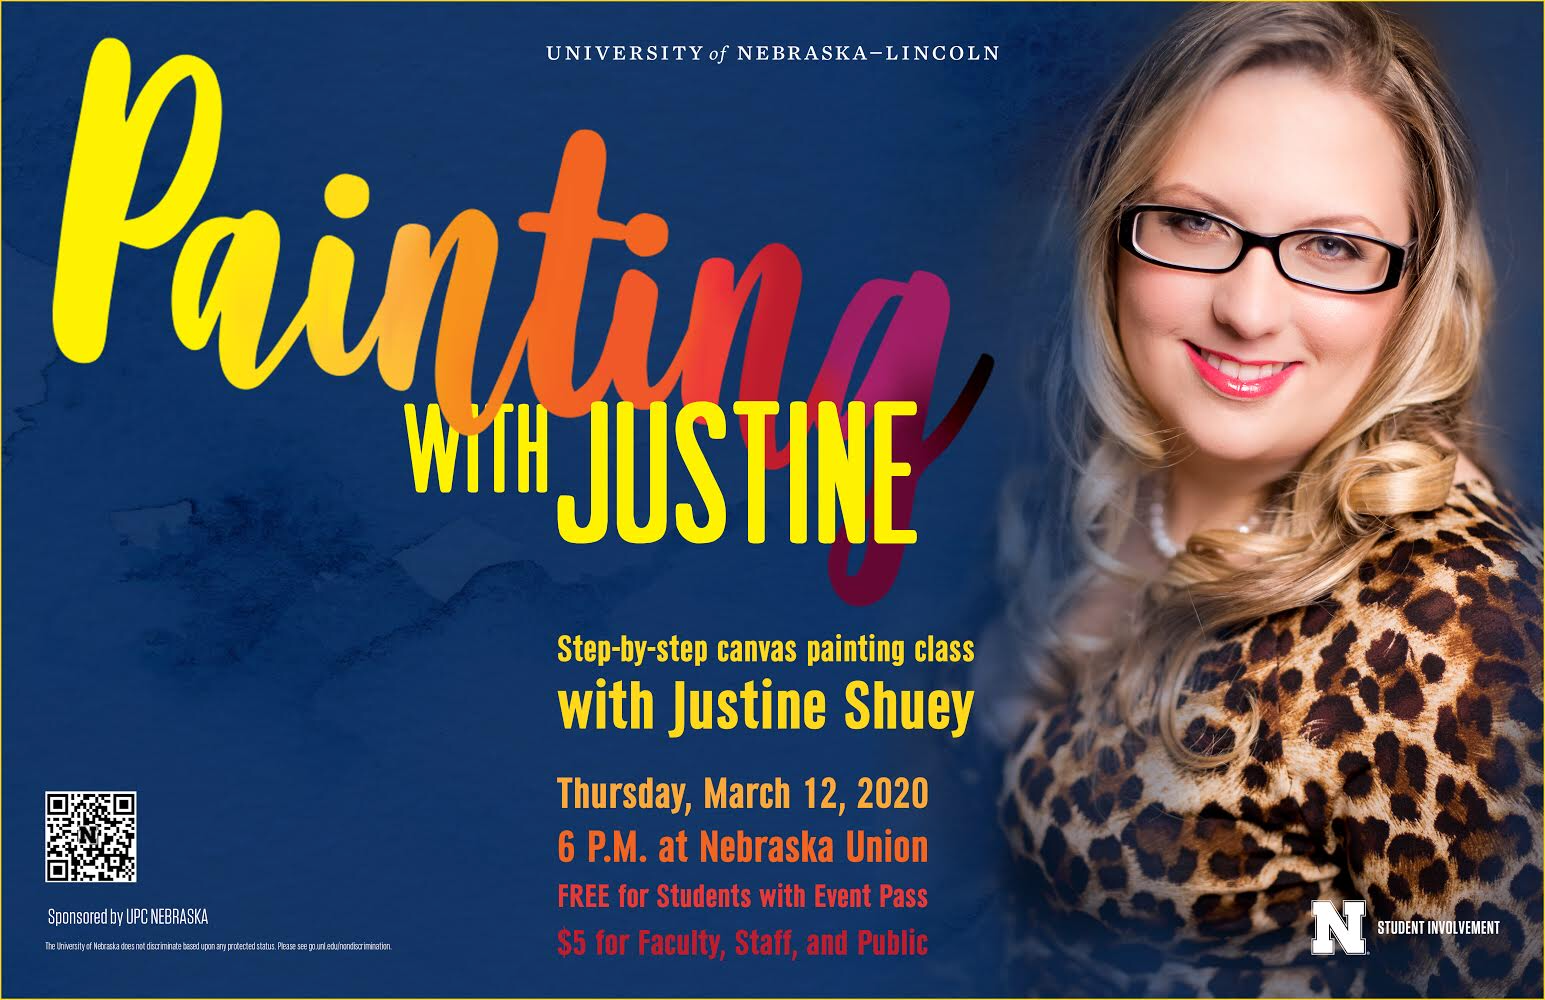 Come hang out, relax and paint with Justine on March 12, 2020 in the Union Ballroom.